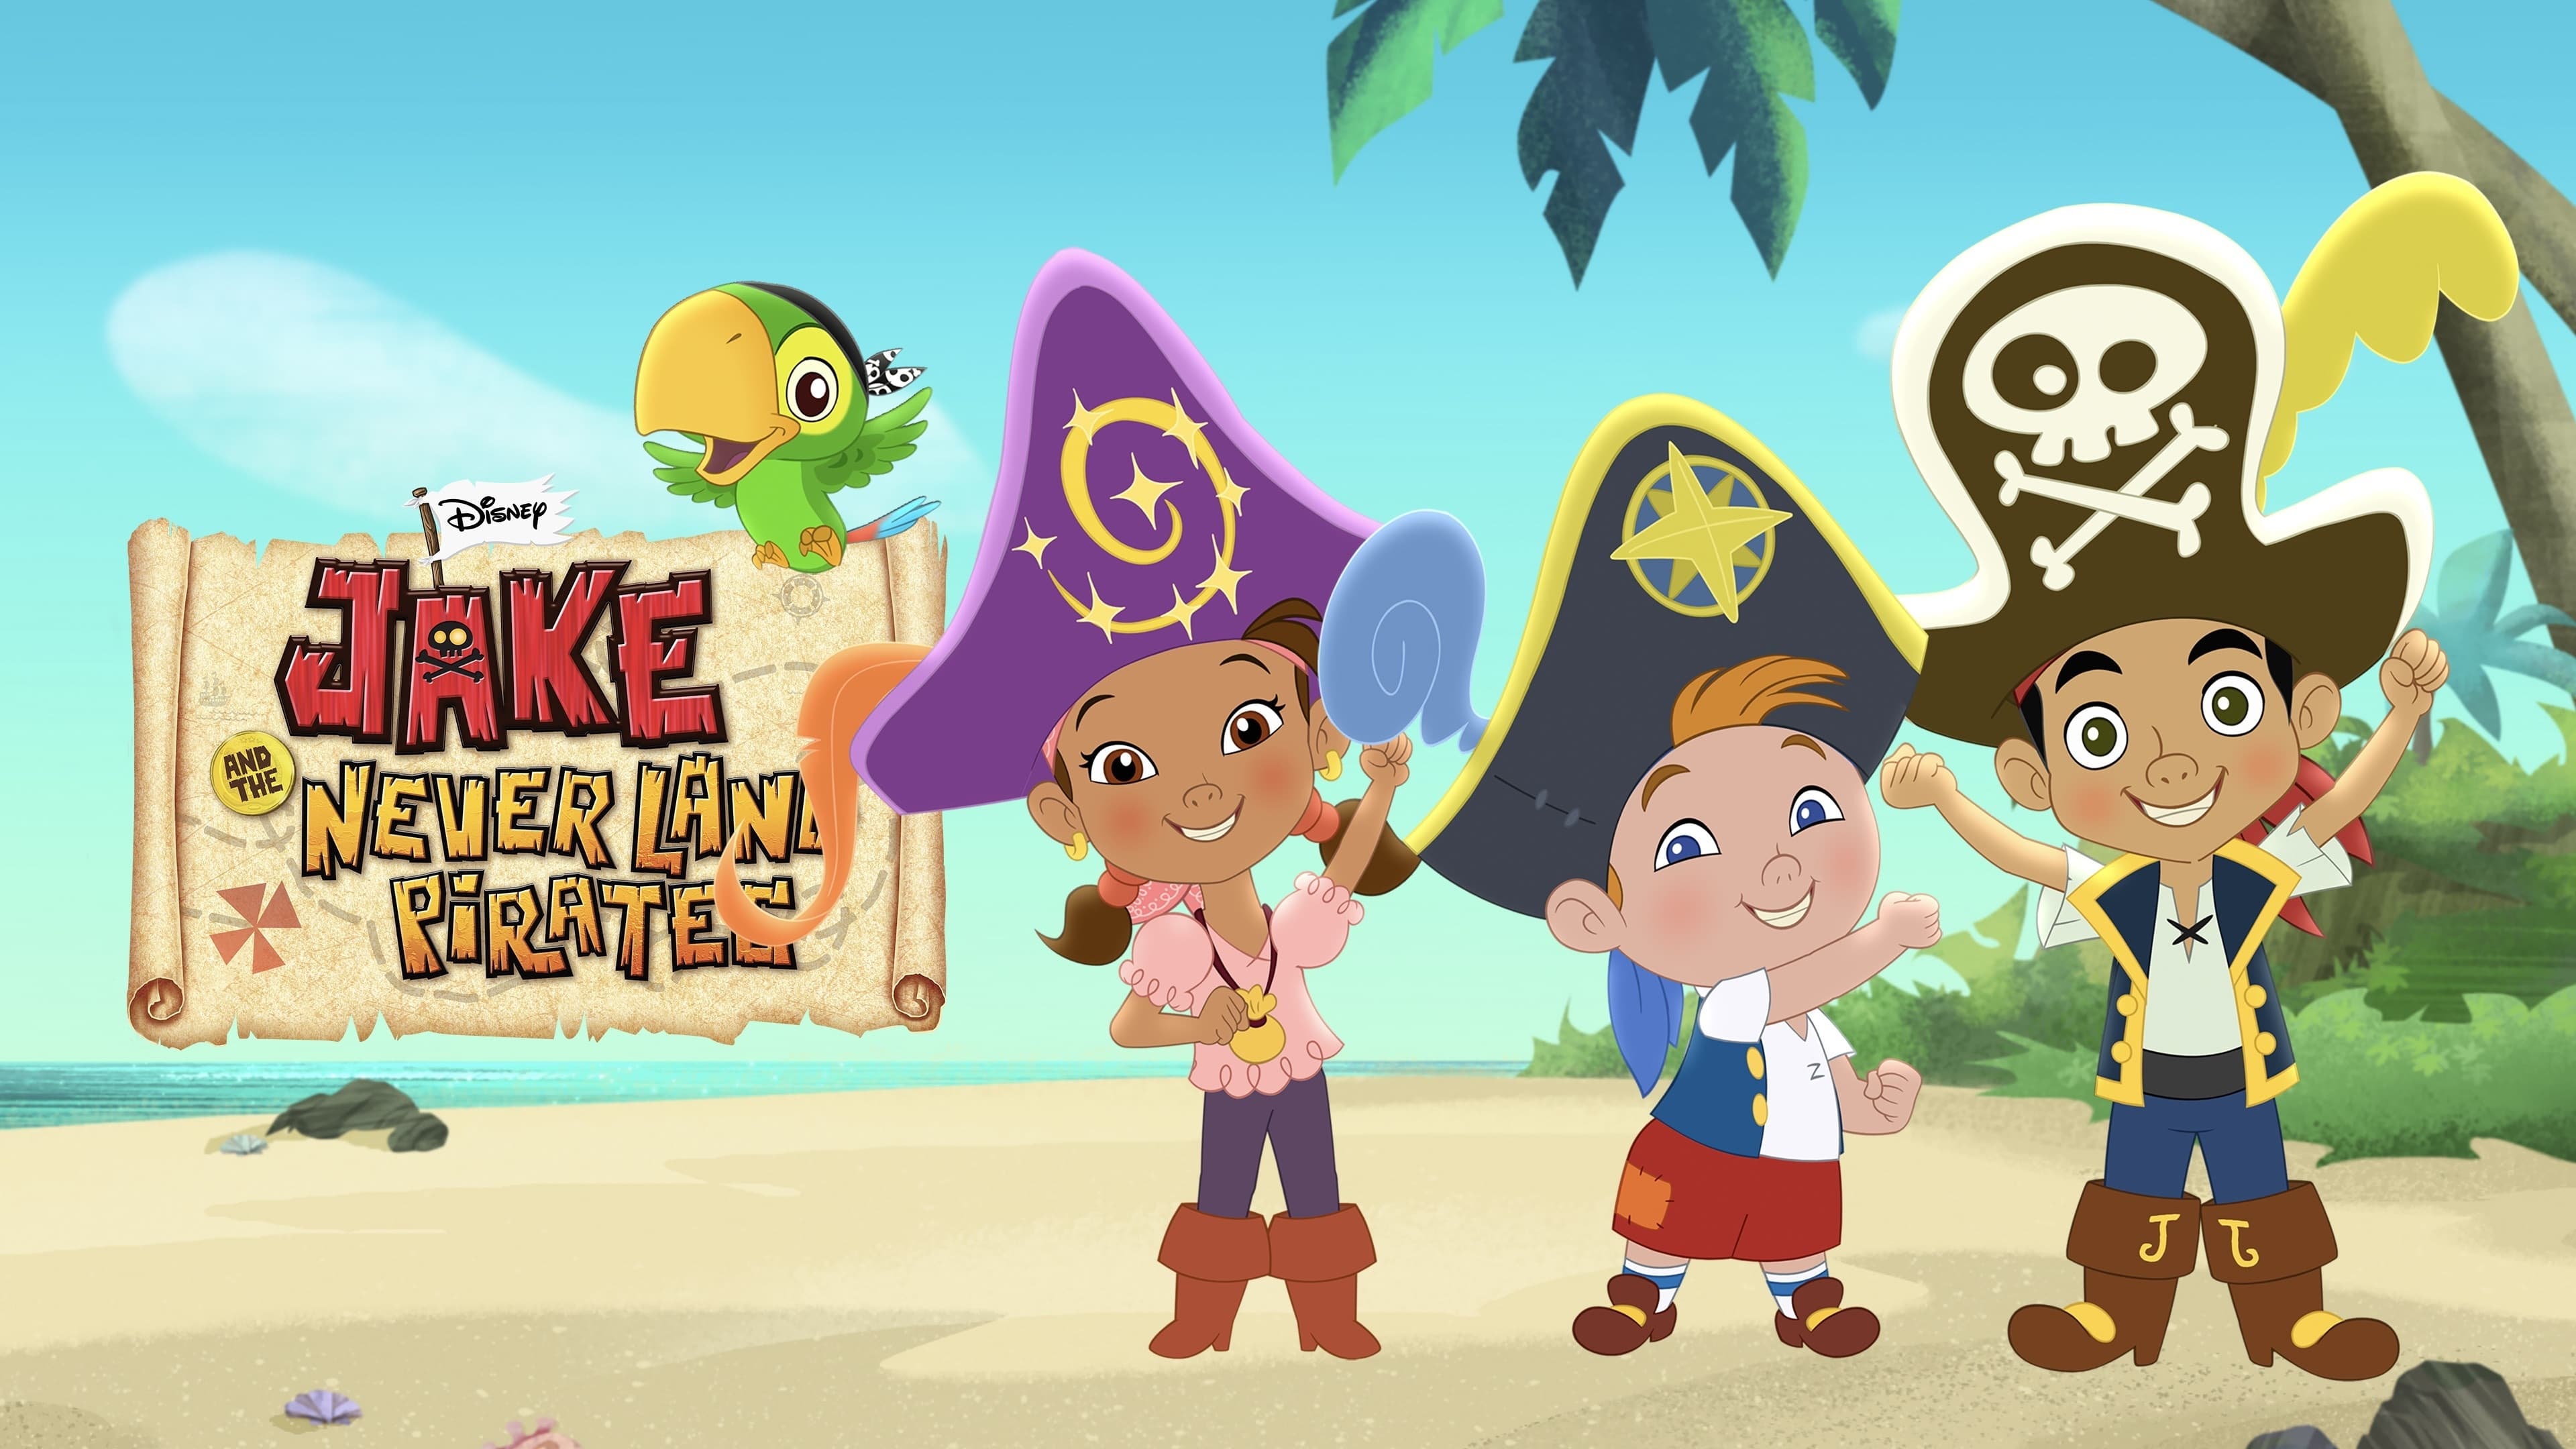 Jake and the Never Land Pirates Full TV Series Online Free in HD Quality .....